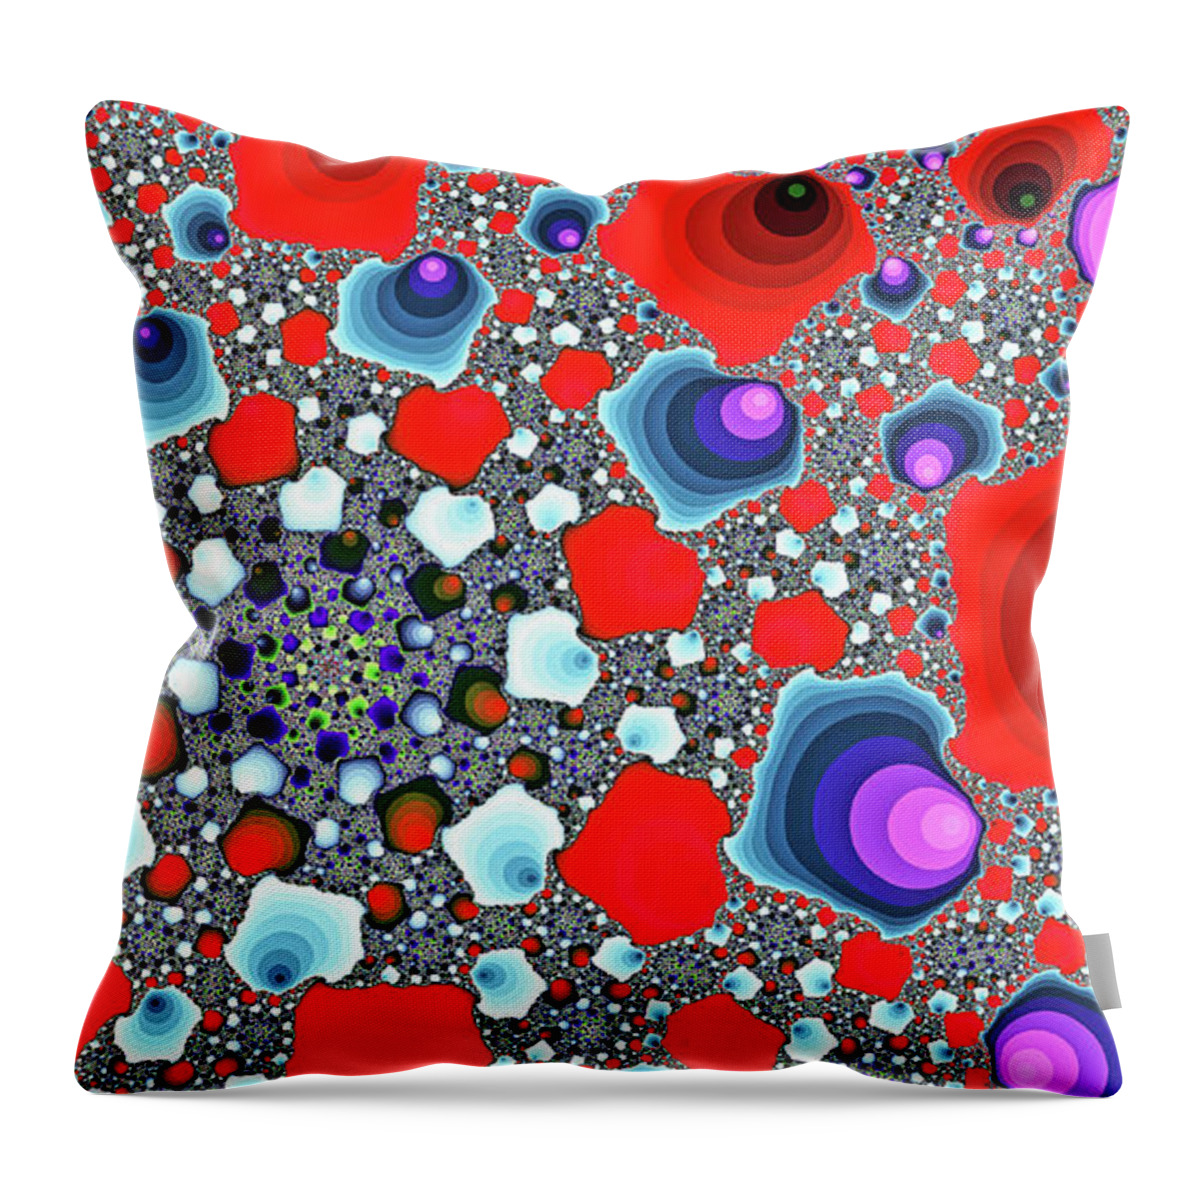 Abstract Throw Pillow featuring the digital art Creative Spiral Abstract Art by Don Northup